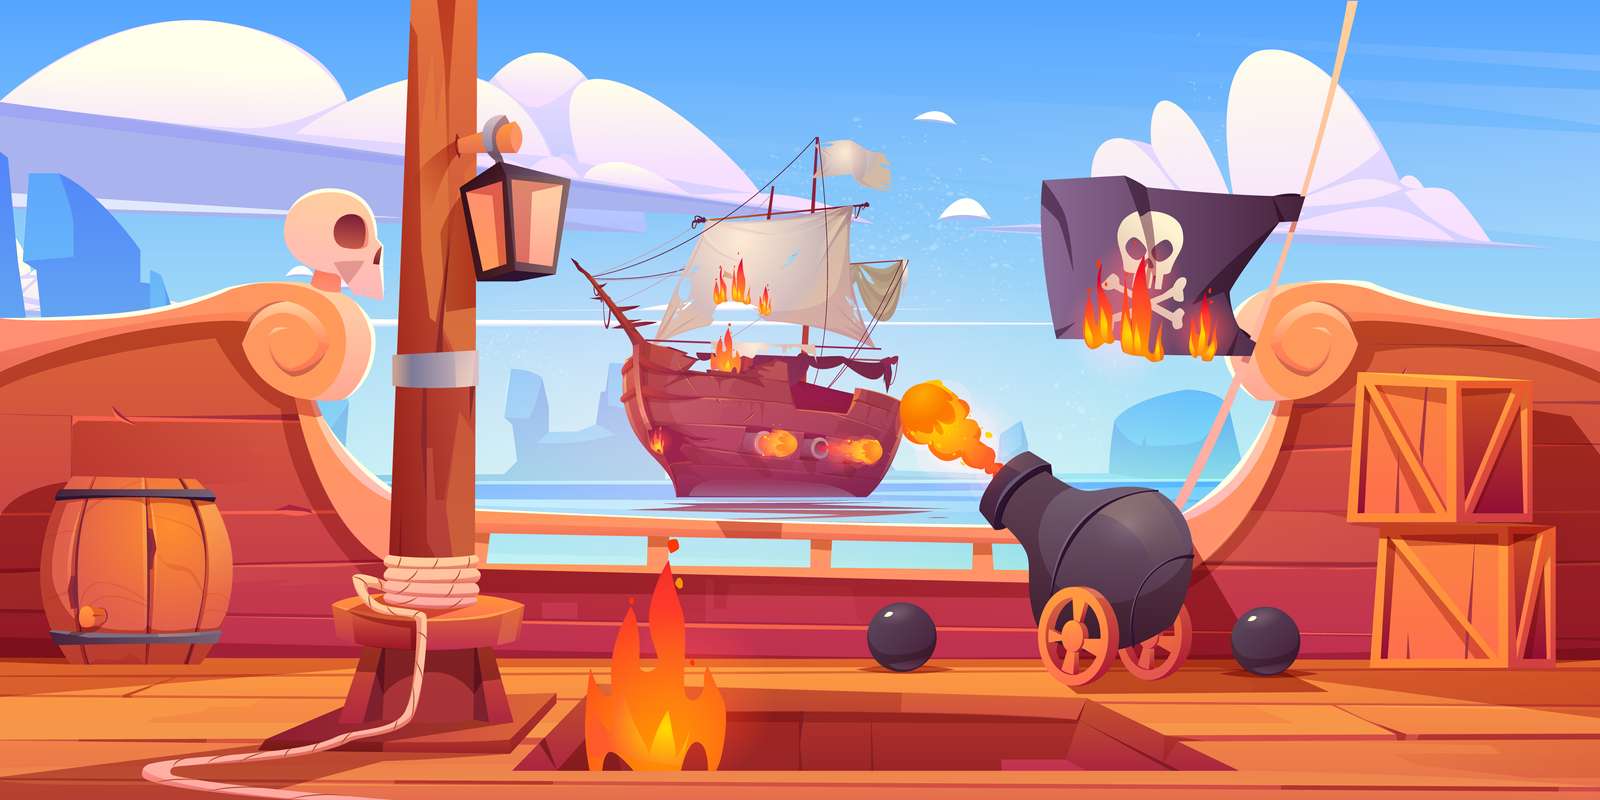 Pirate Ship Puzzle puzzle online from photo